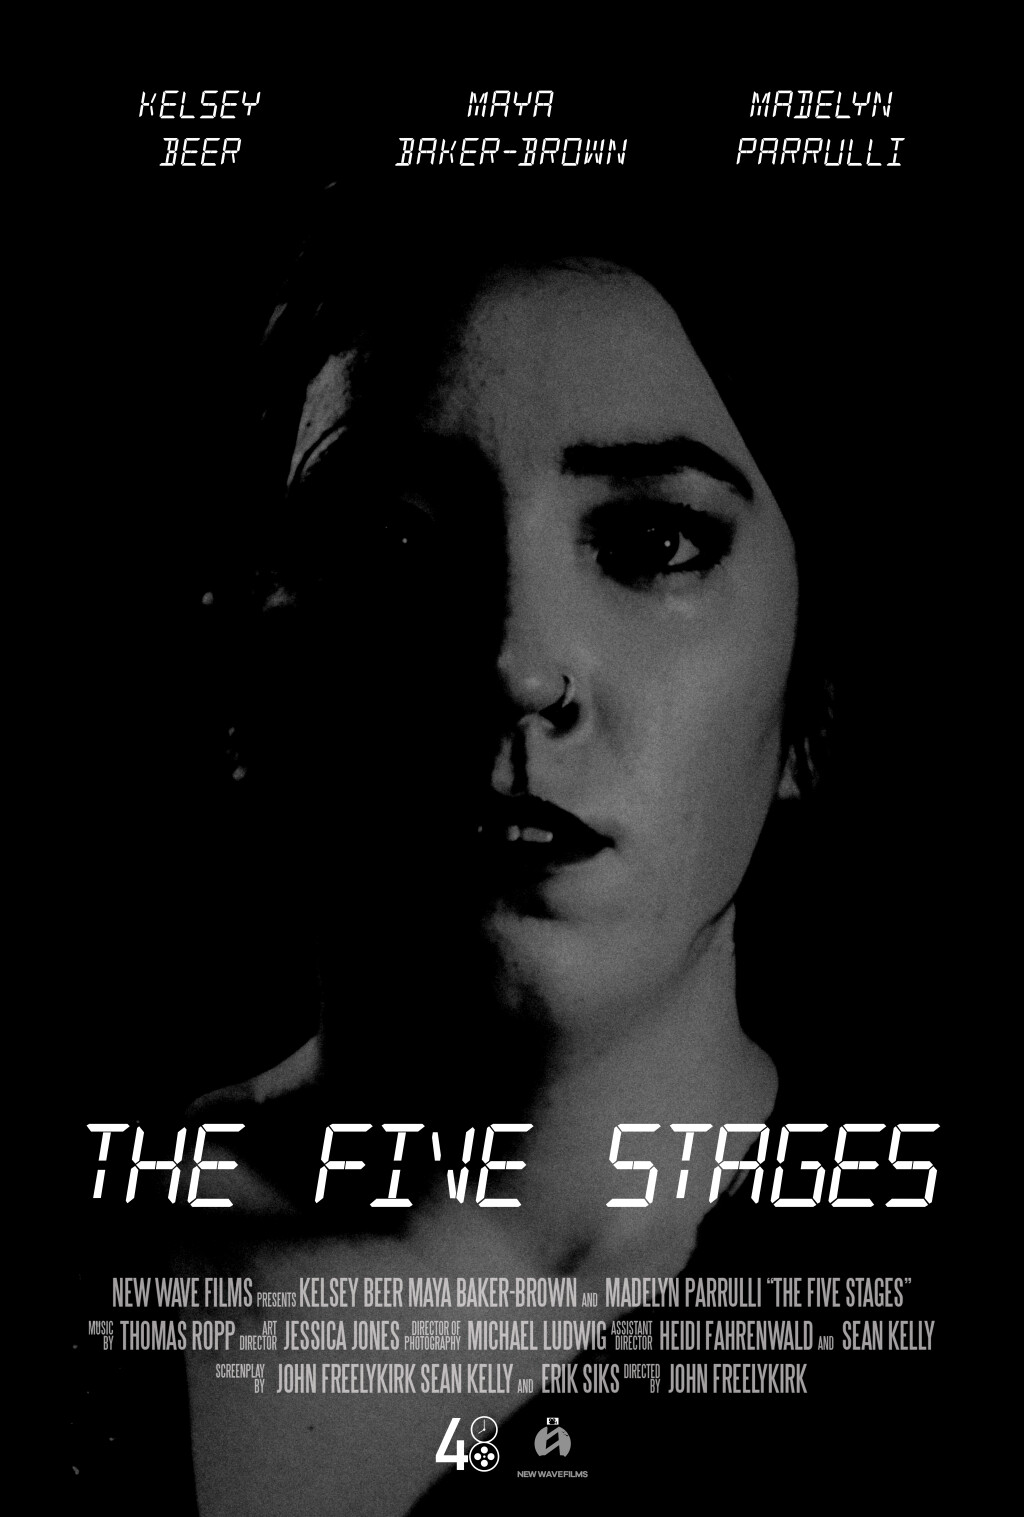 Filmposter for THE FIVE STAGES